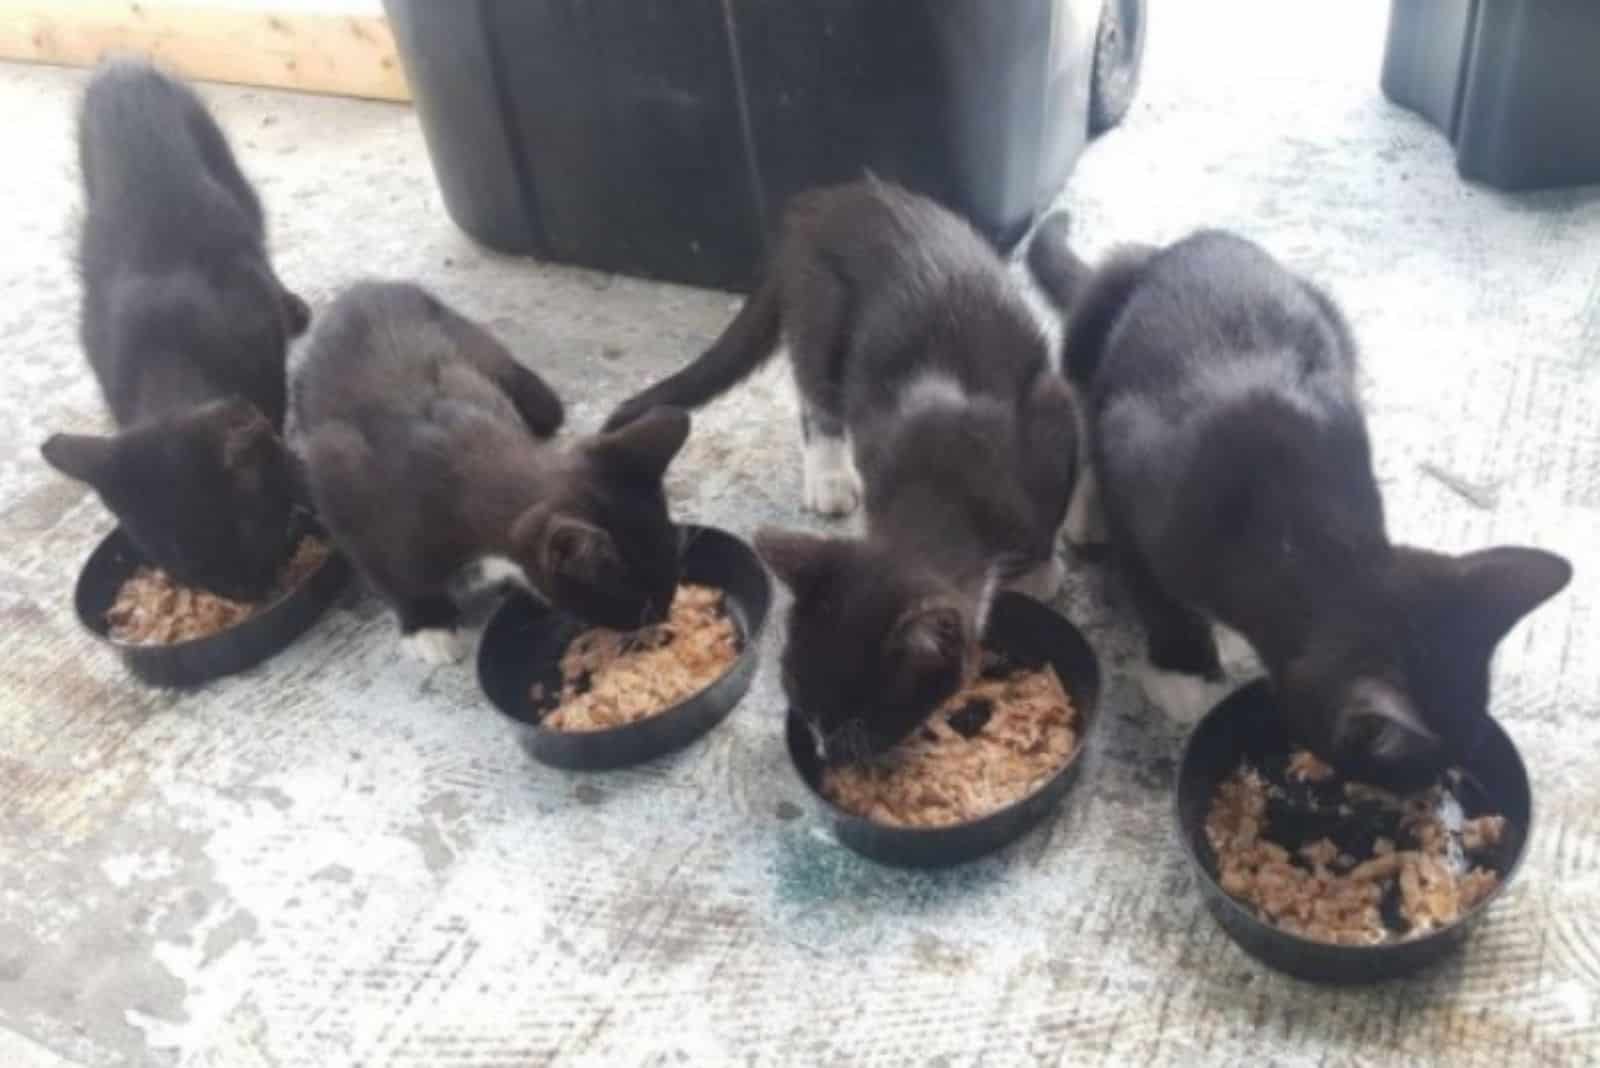 a wild cat with her kittens eats food from bowls